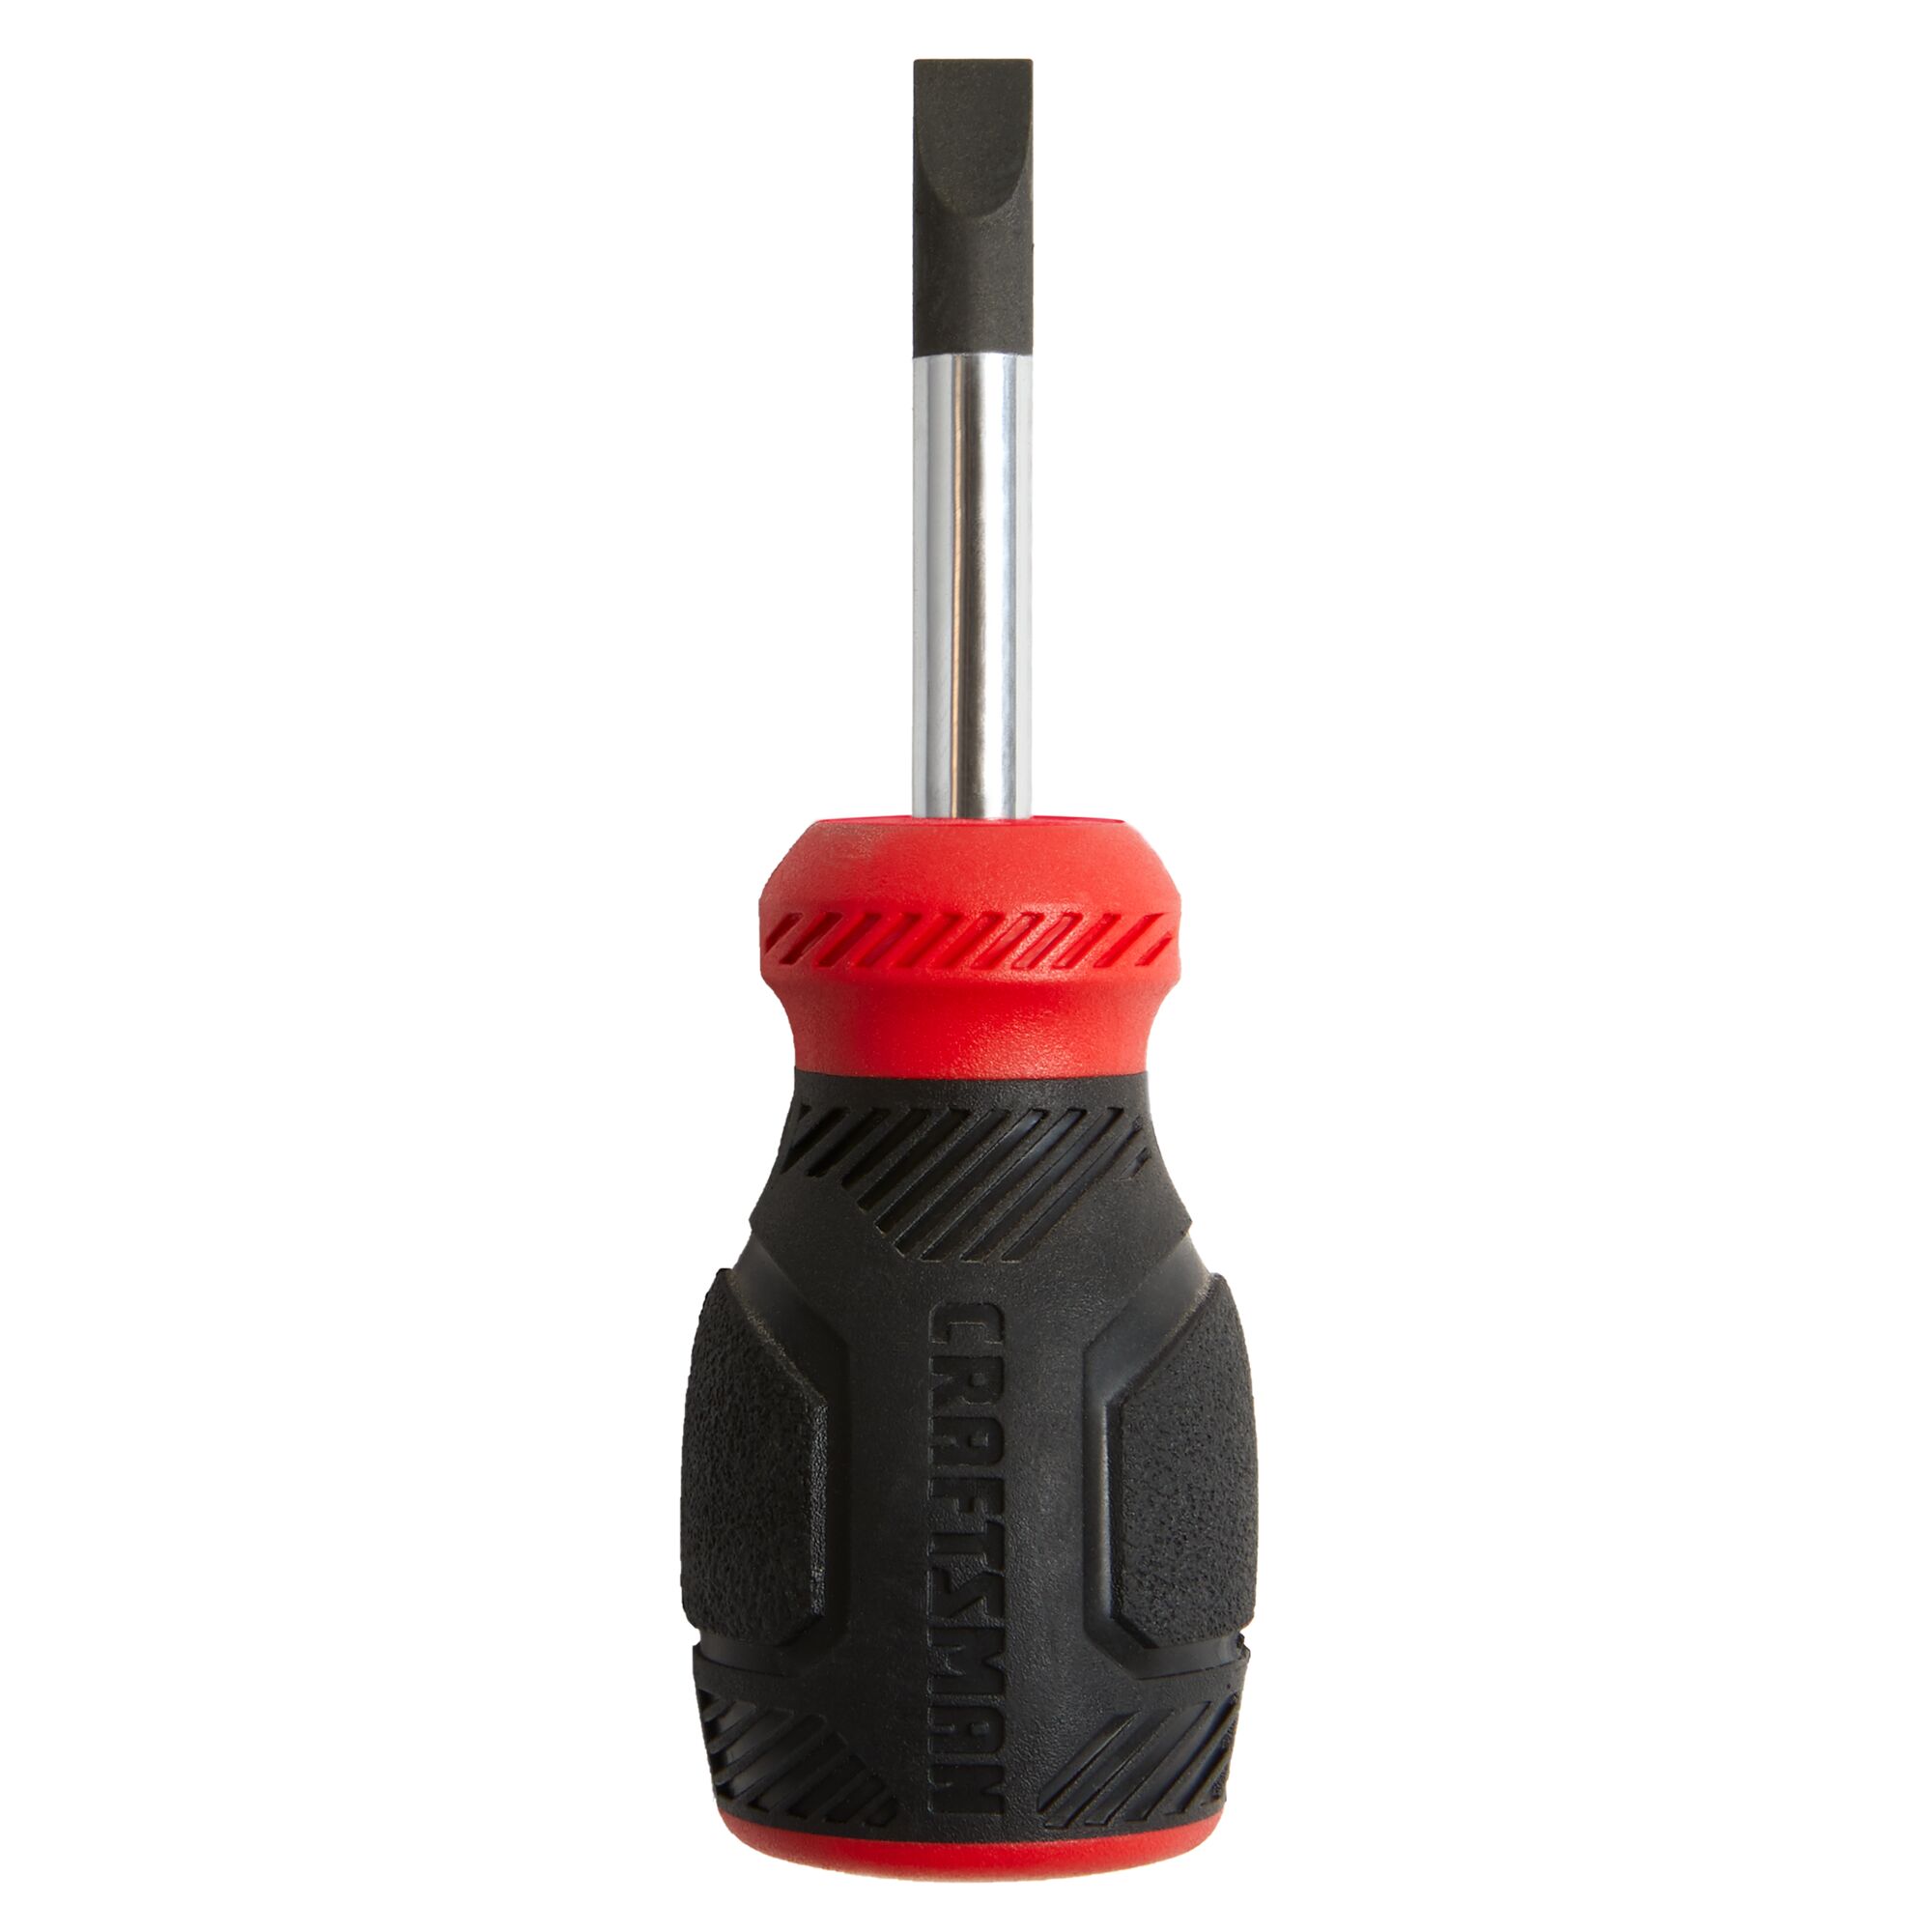 View of CRAFTSMAN Screwdrivers: Bi-Material on white background